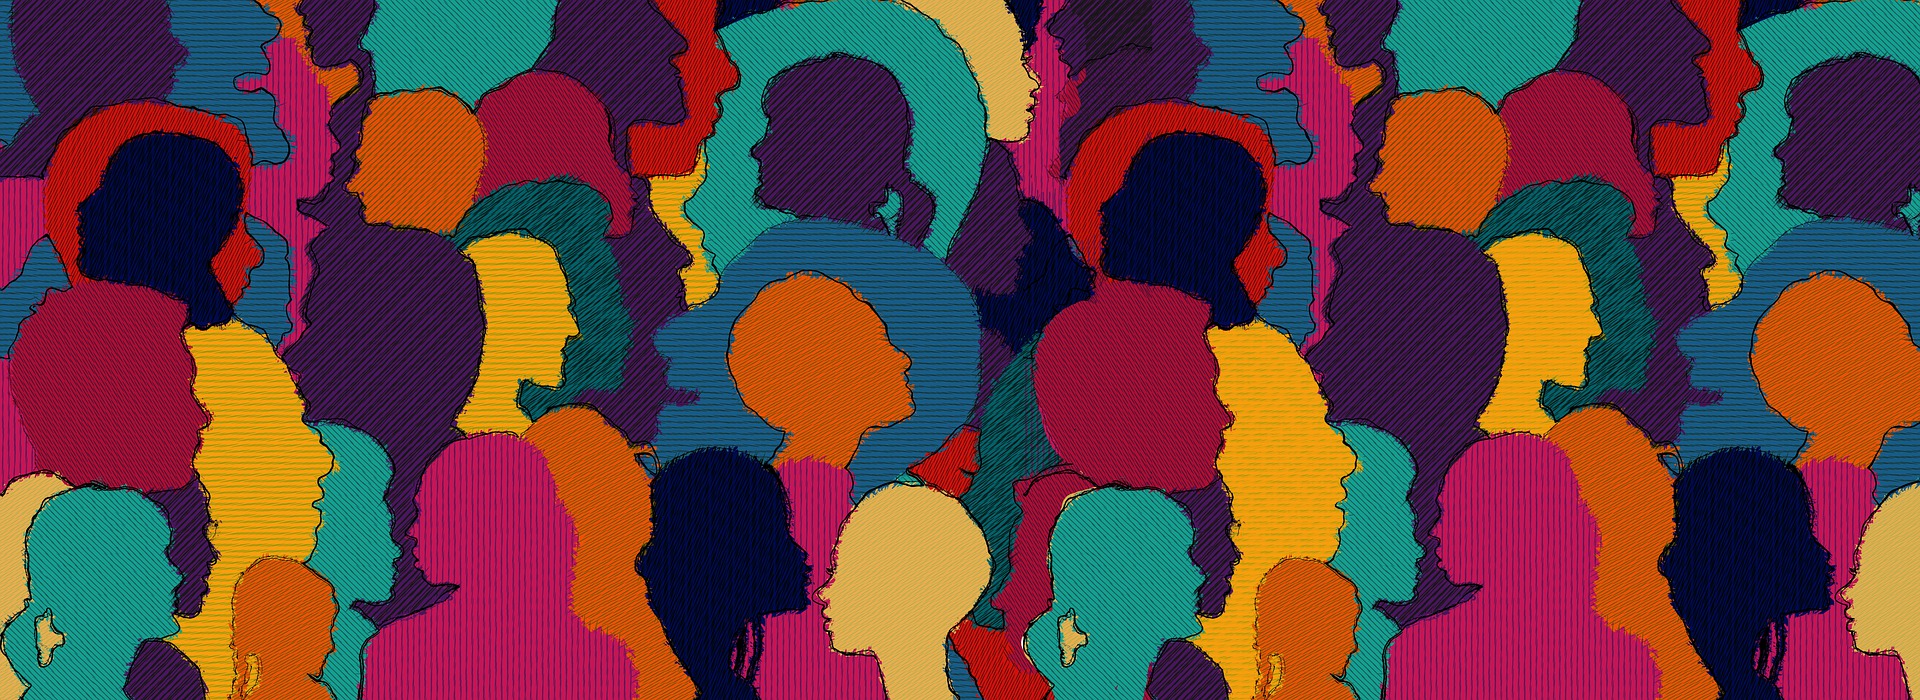 Illustration of silhouettes of People in a rainbow of colors